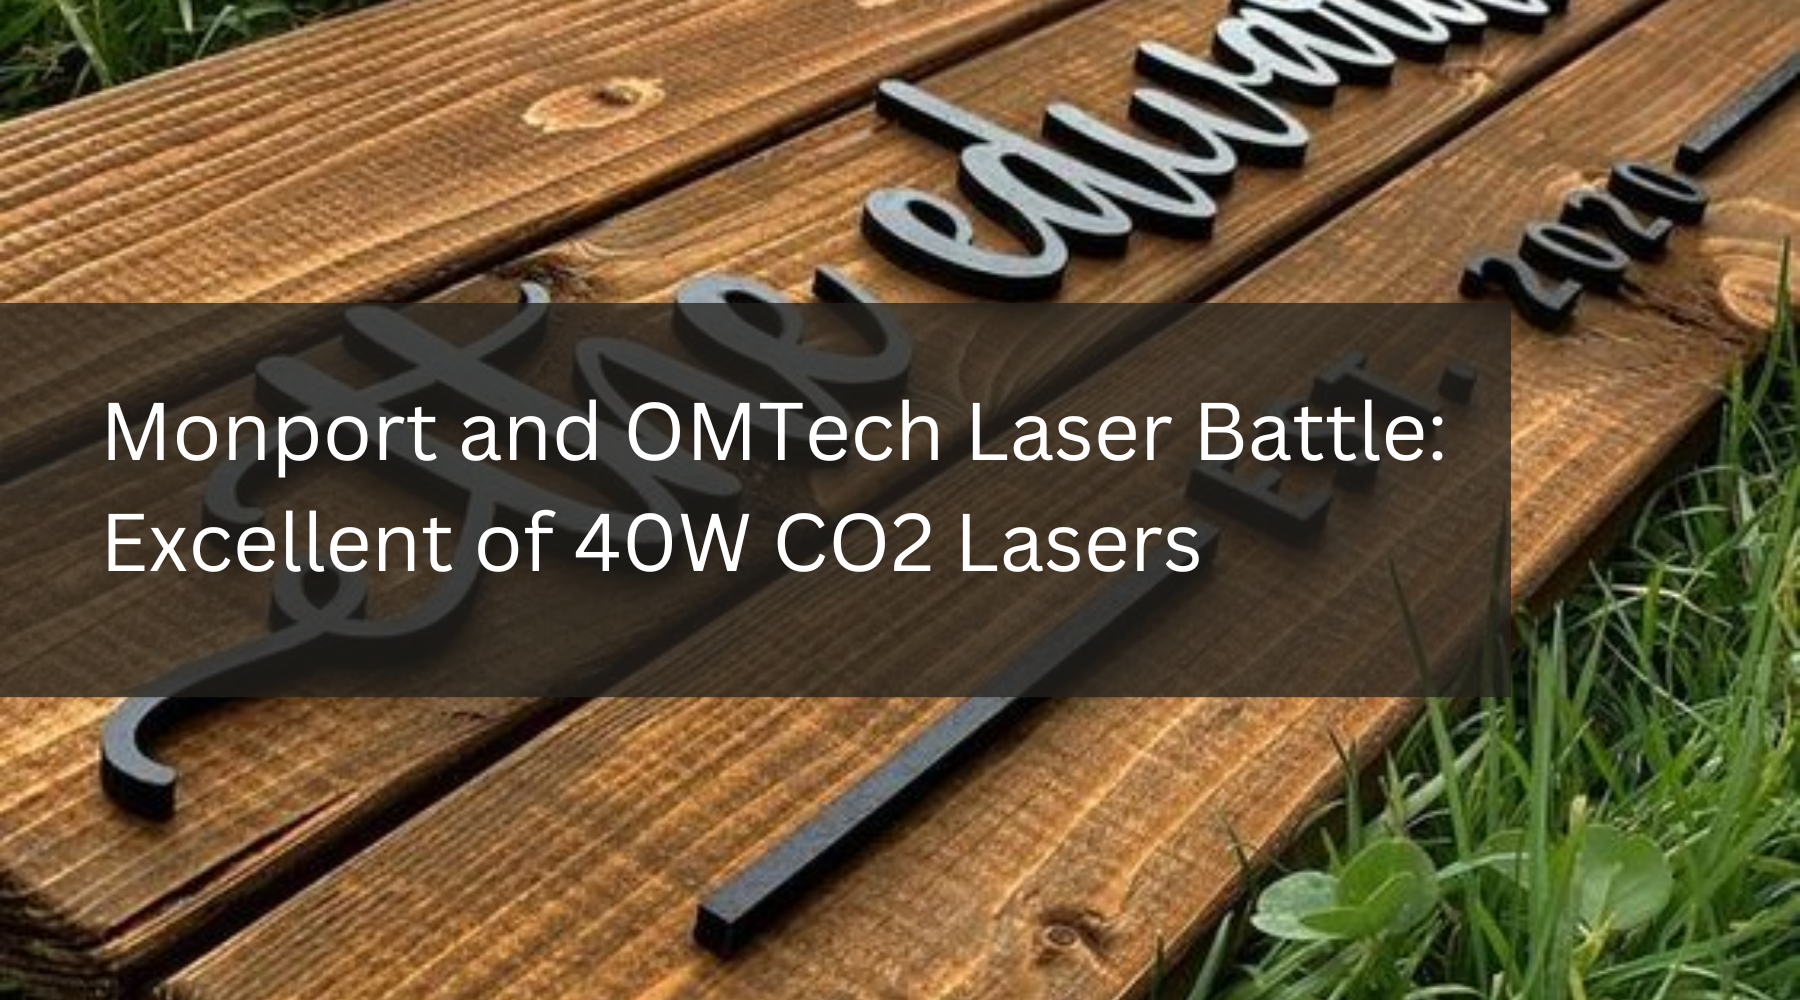 Monport and OMTech Laser Battle: Excellent of 40W CO2 Lasers